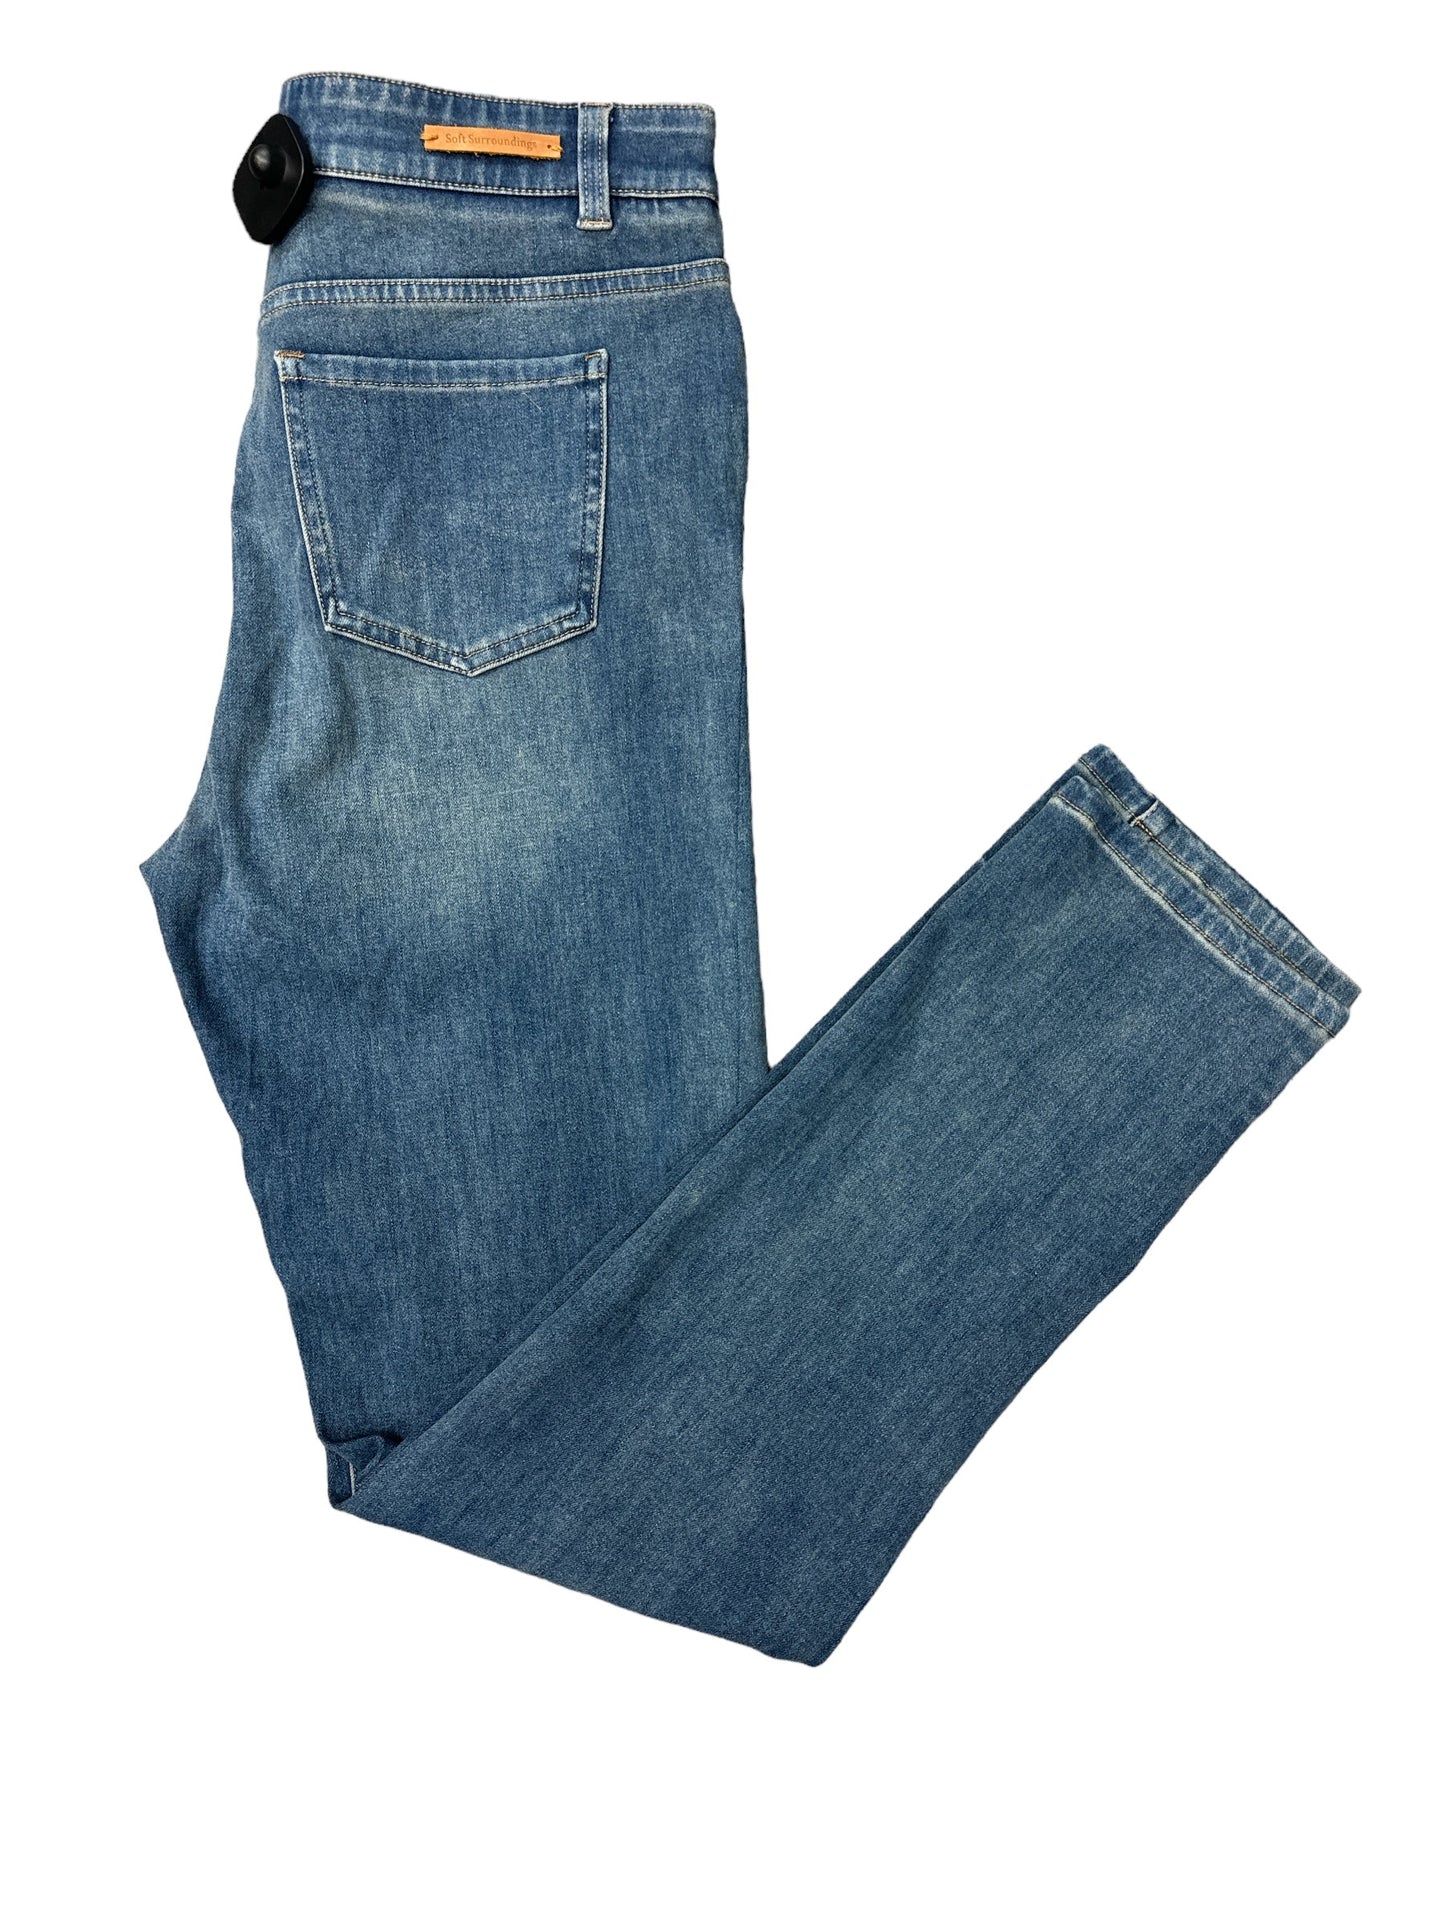 Jeans Straight By Soft Surroundings  Size: 6long